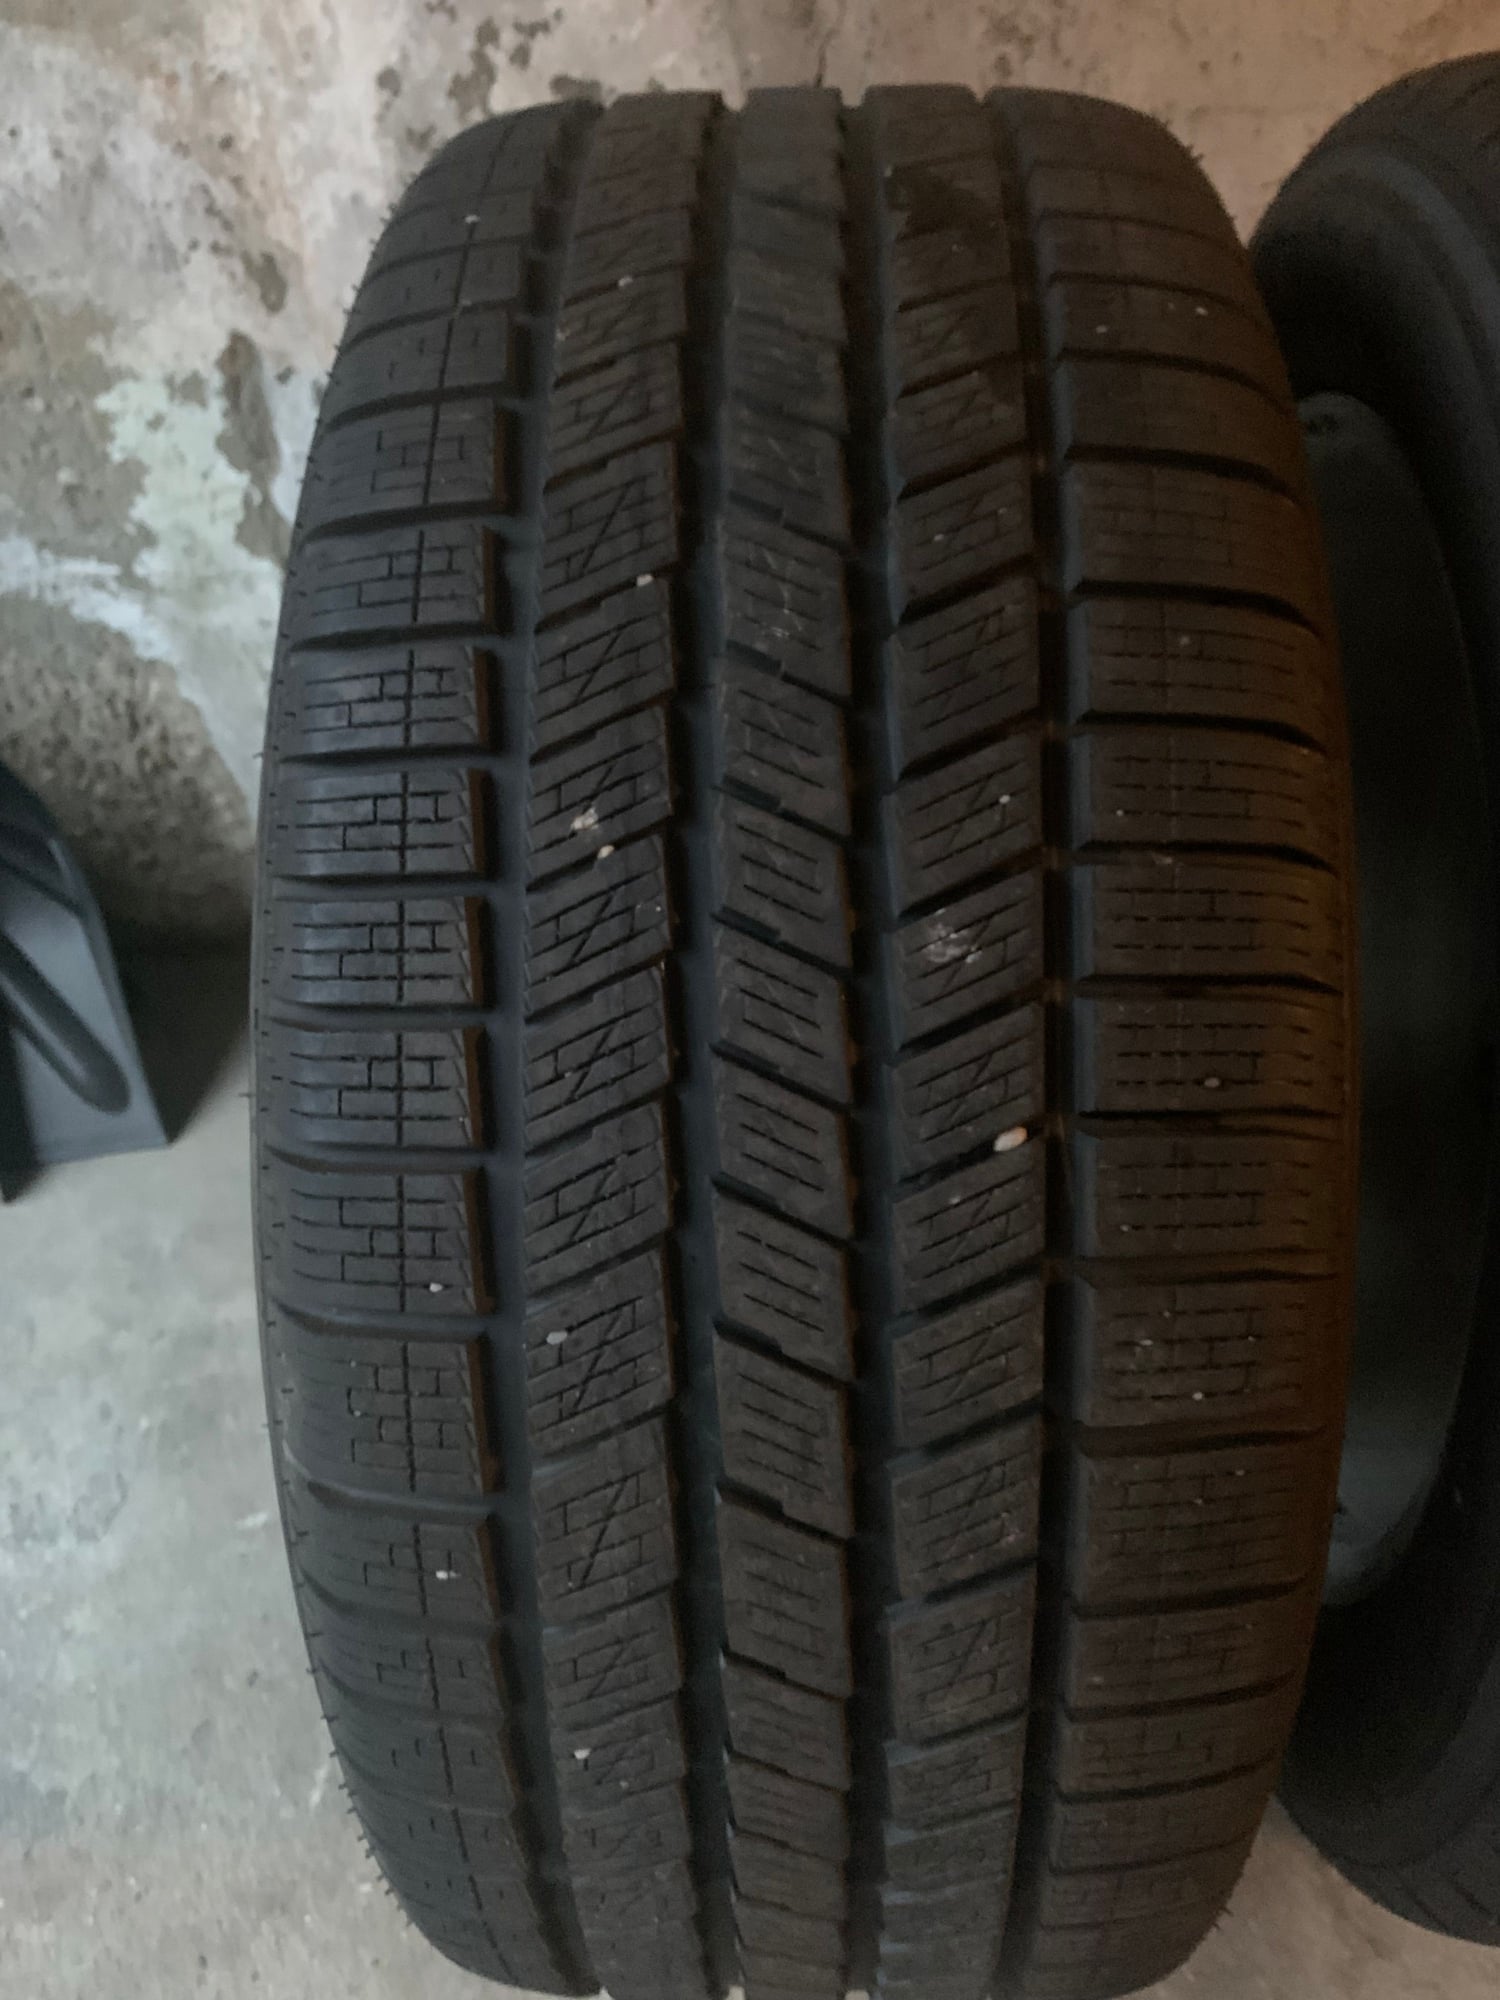 Wheels and Tires/Axles - 19" OEM Porsche Cayenne Design II Winter Wheels - Used - 0  All Models - Briarwood, NY 11435, United States